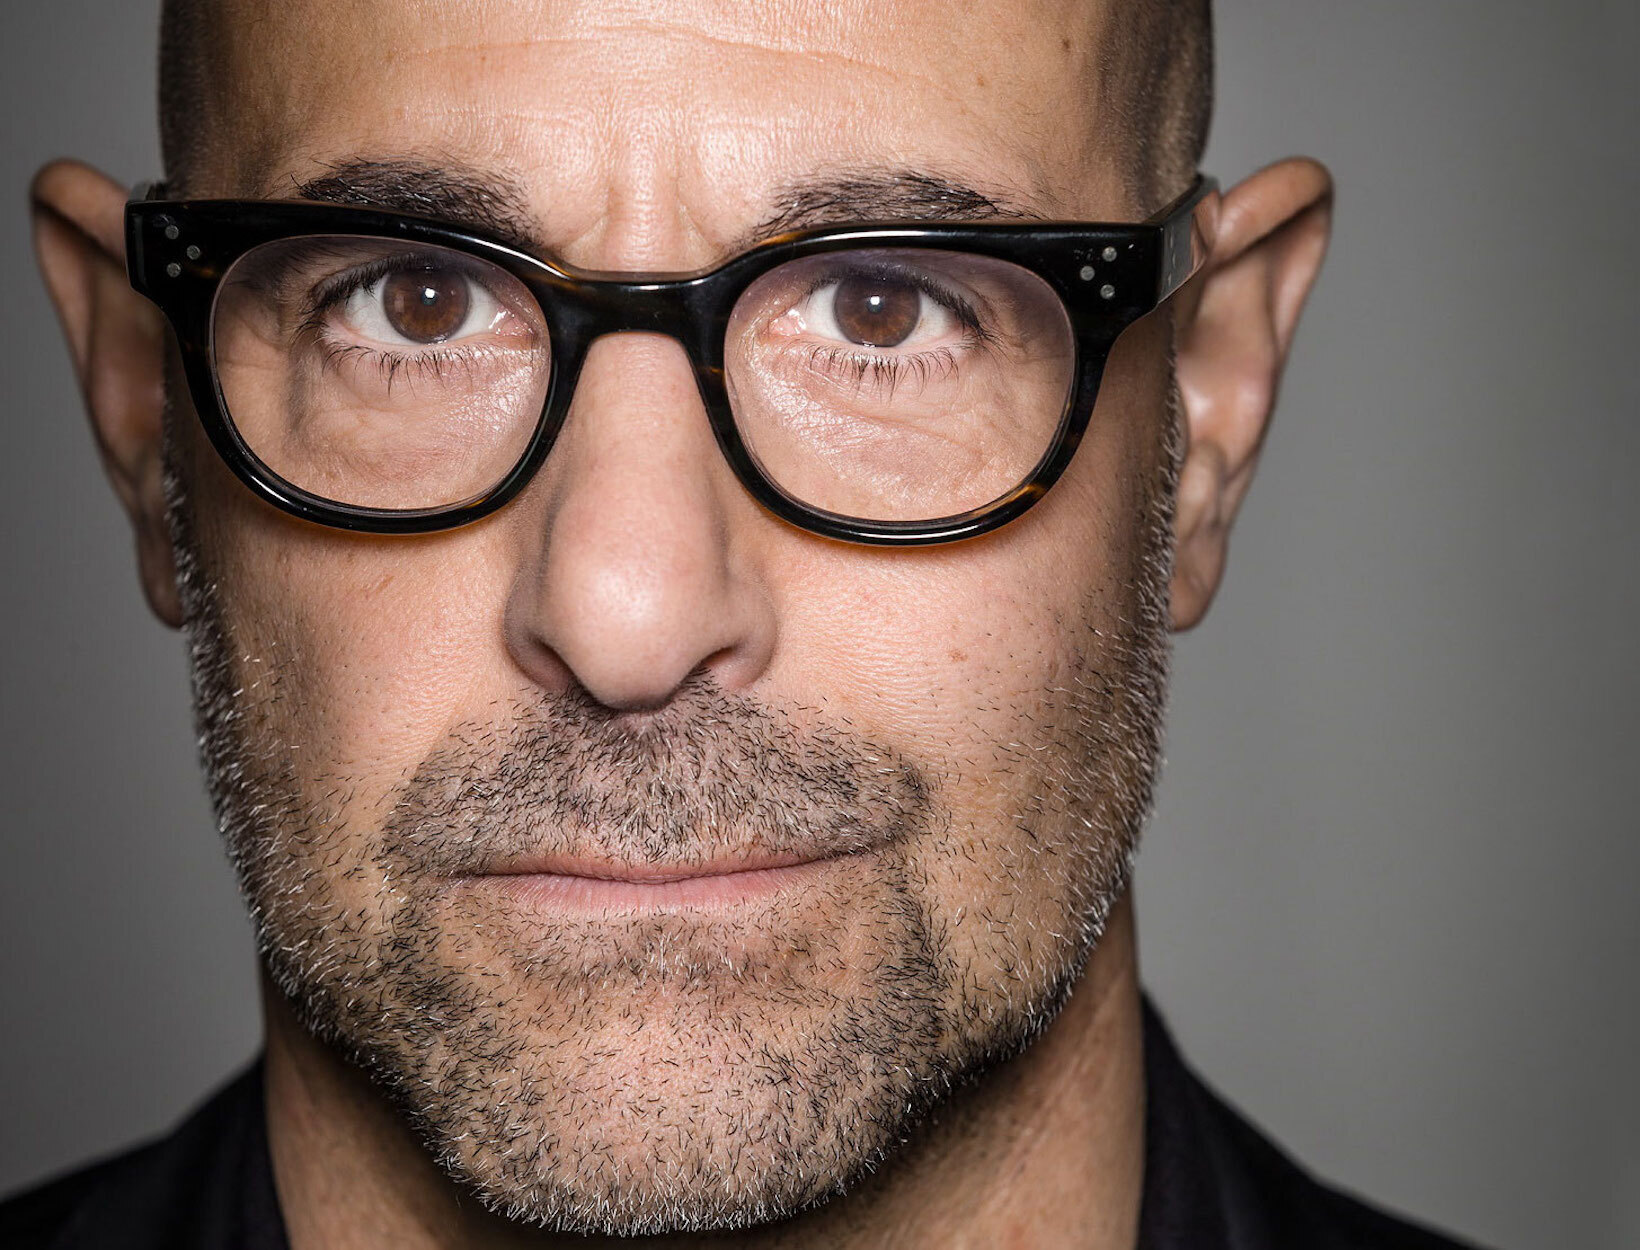 Sanely Xxx Video Sex - Gwyneth Paltrow x Stanley Tucci: For the Love of Food | goop